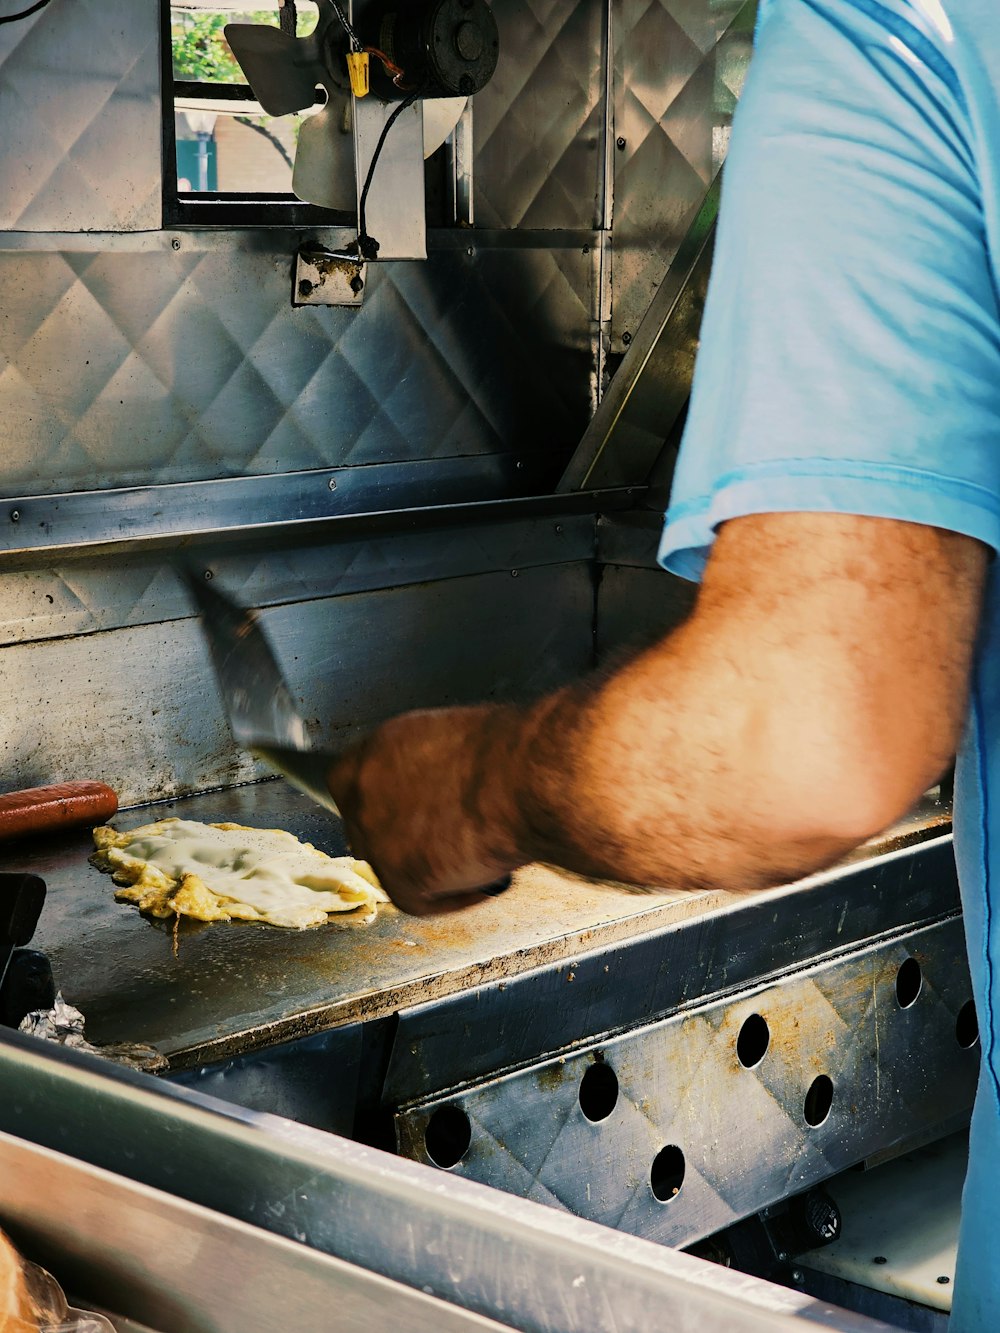 a man in a blue shirt is cooking food on a grill